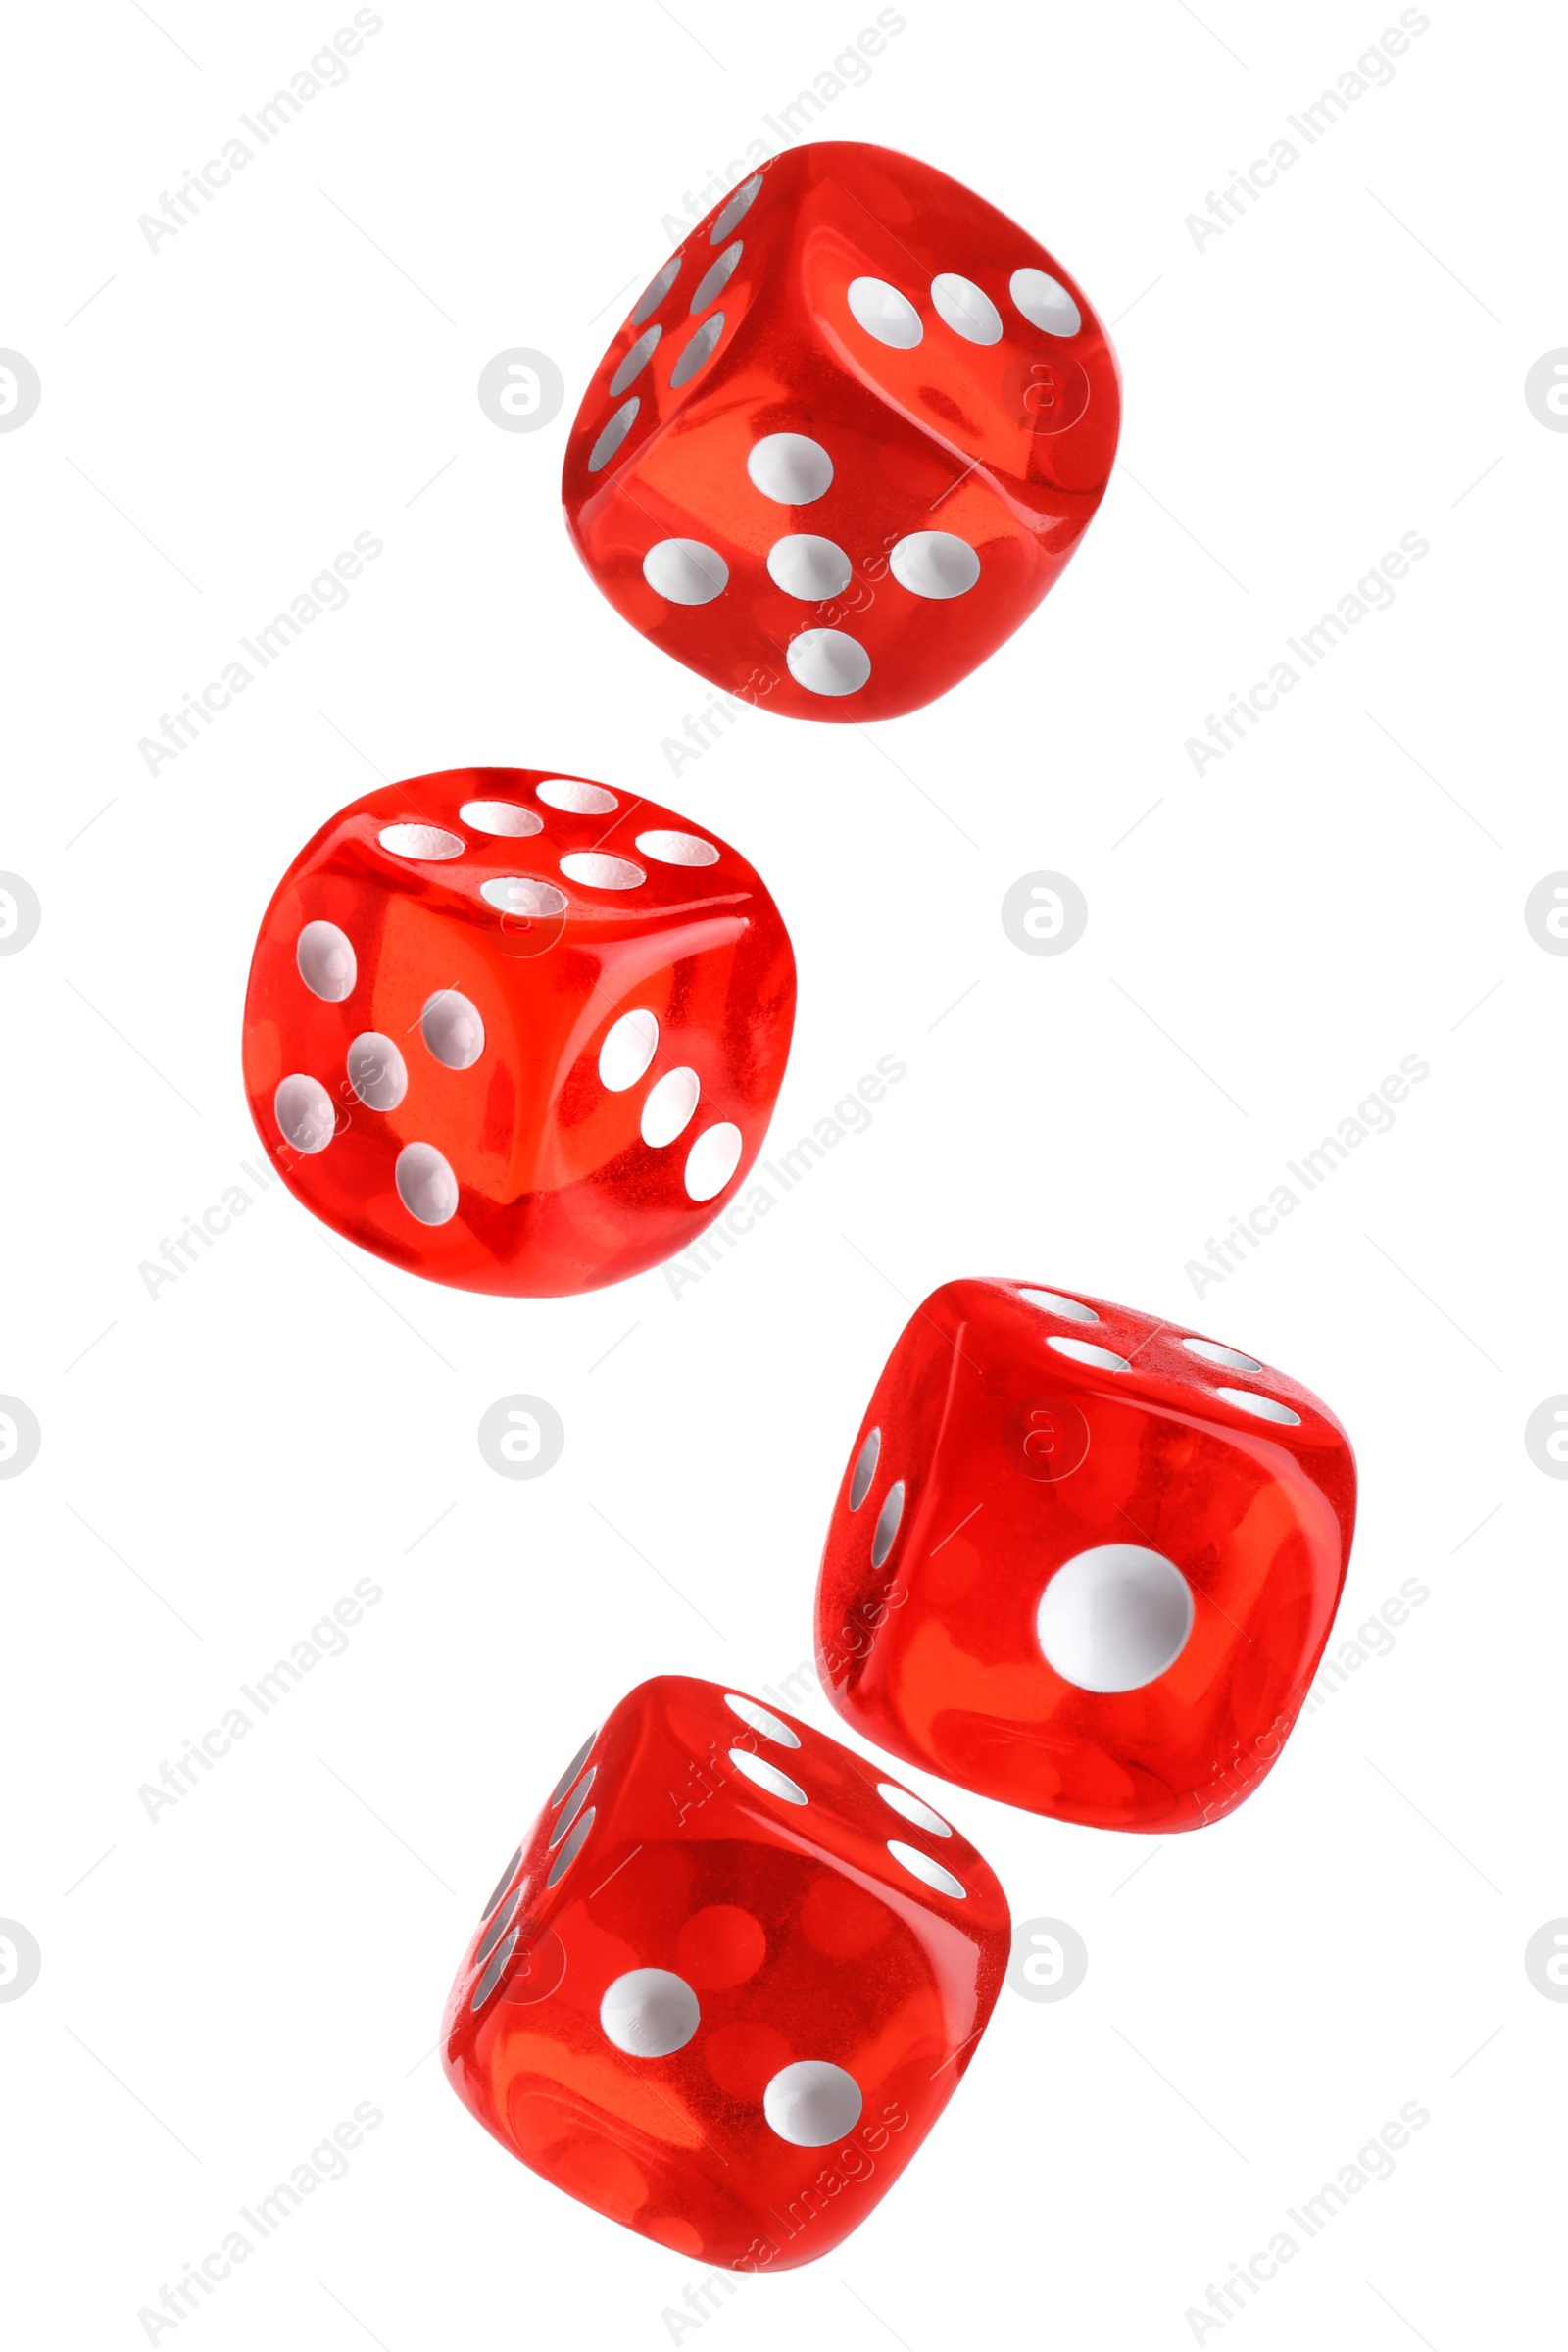 Image of Four red dice in air on white background